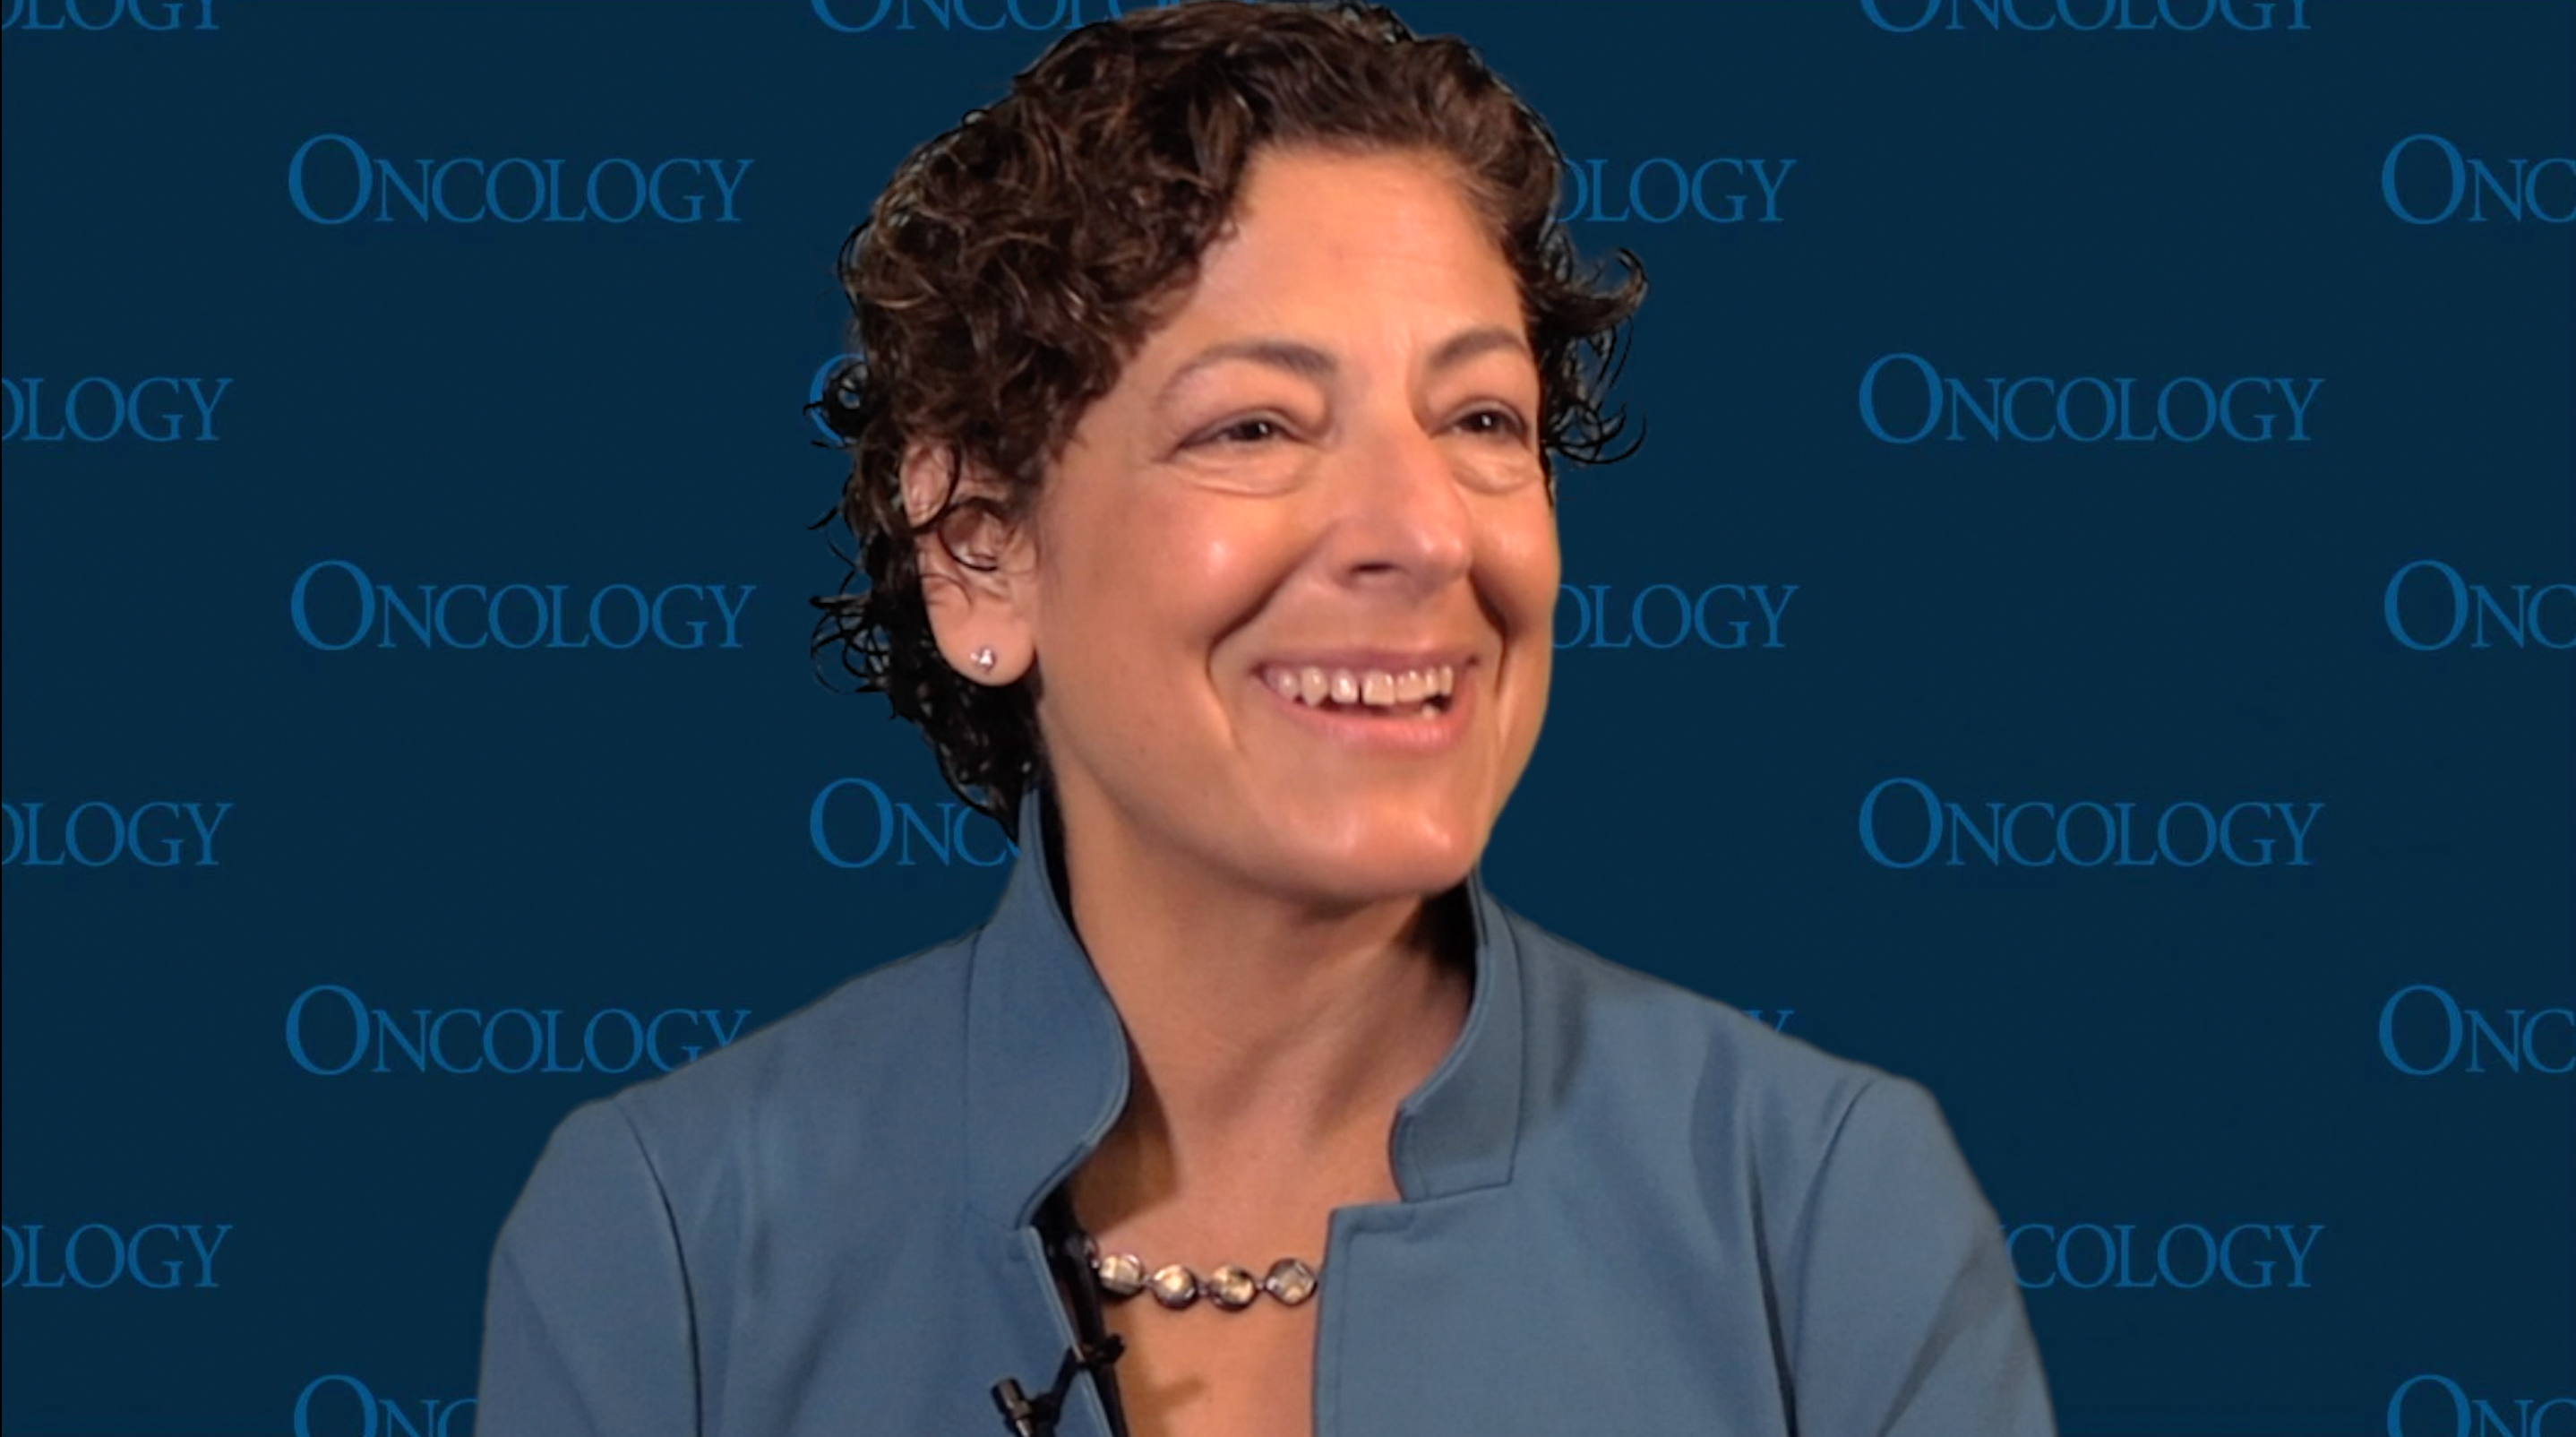 Angela DeMichele, MD, MSCE, Assesses the Value of I-SPY2 for Neoadjuvant Treatment of Early Breast Cancer